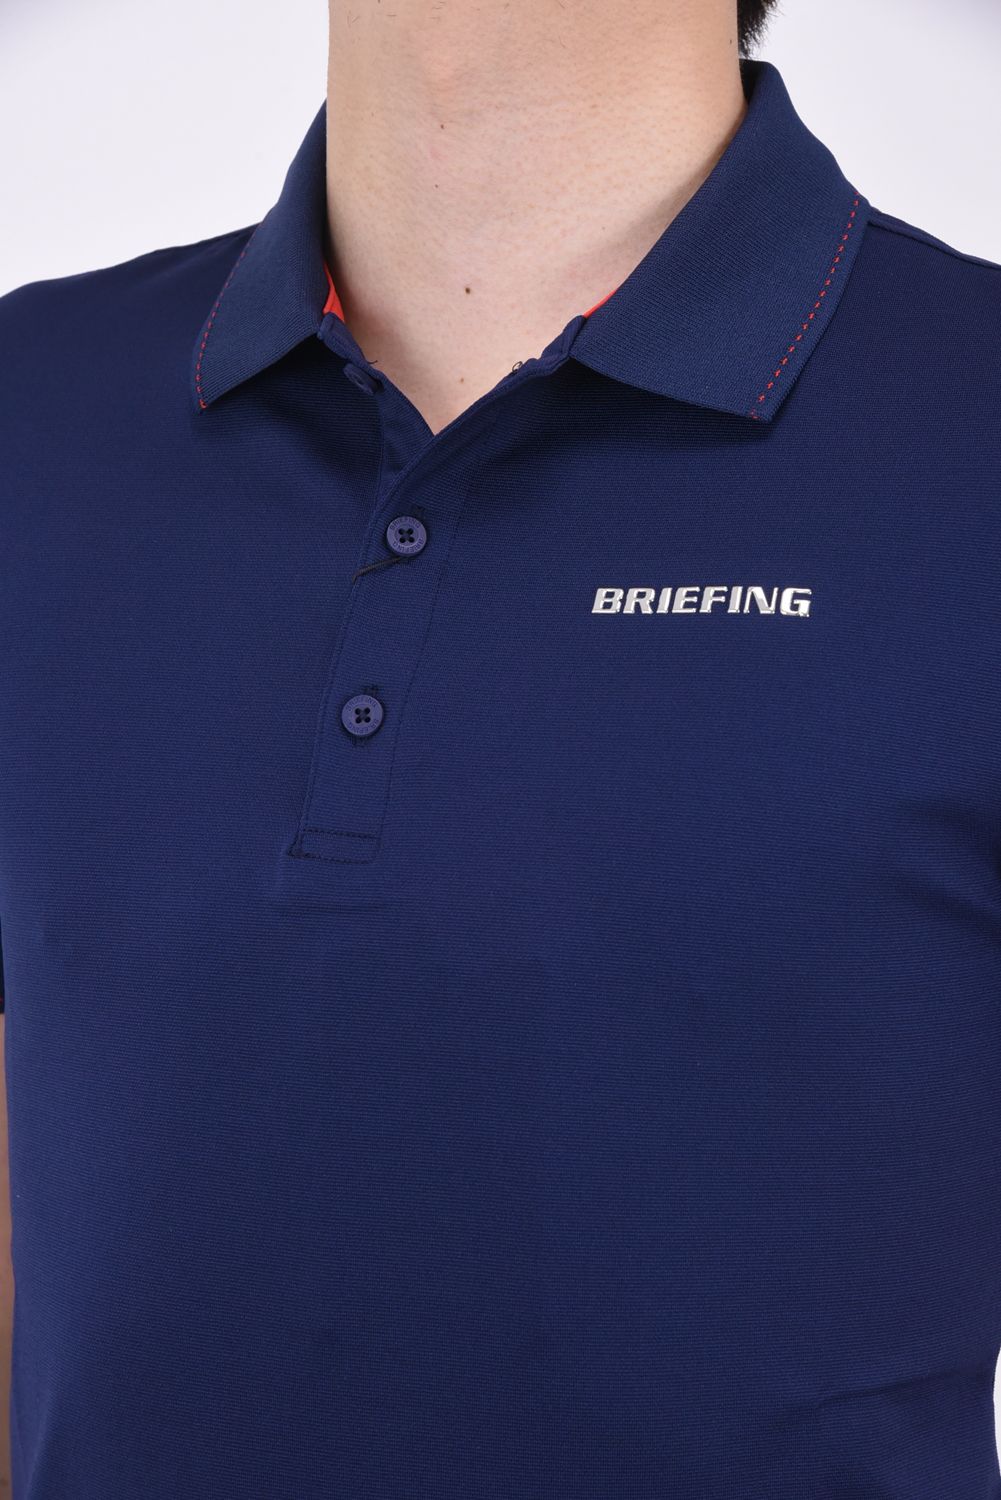 BRIEFING - MENS BASIC POLO / メタリックロゴ ベーシック ポロシャツ